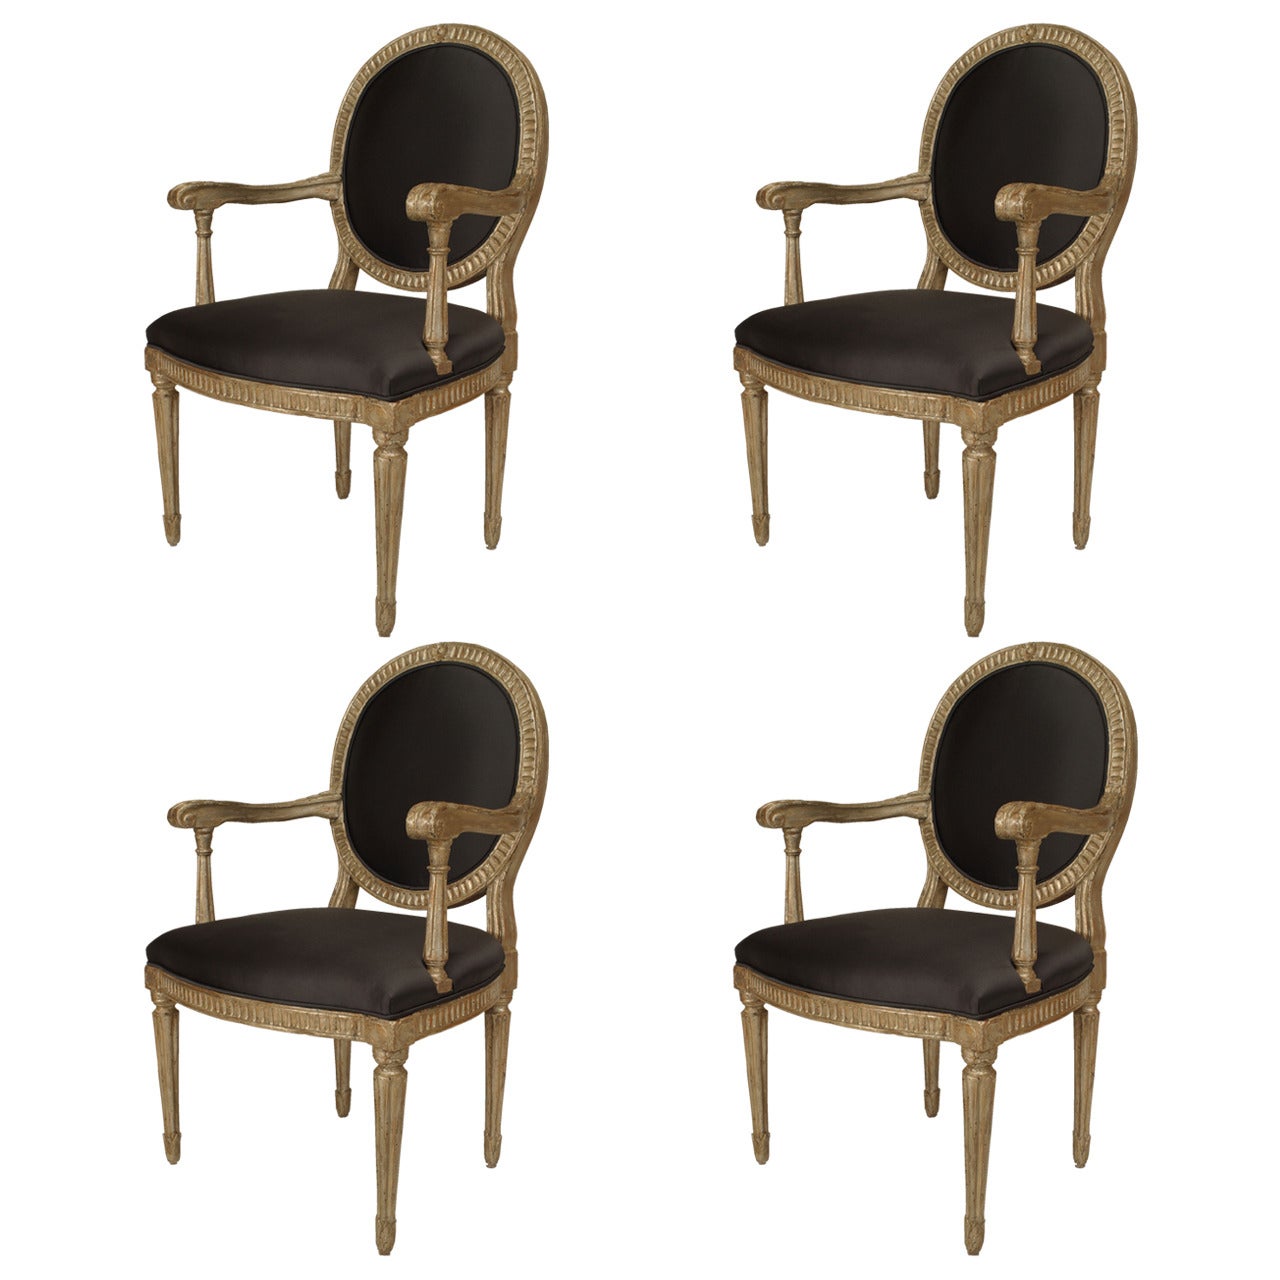 Set of 4 Italian Neo-Classic Silver Gilt Arm Chairs